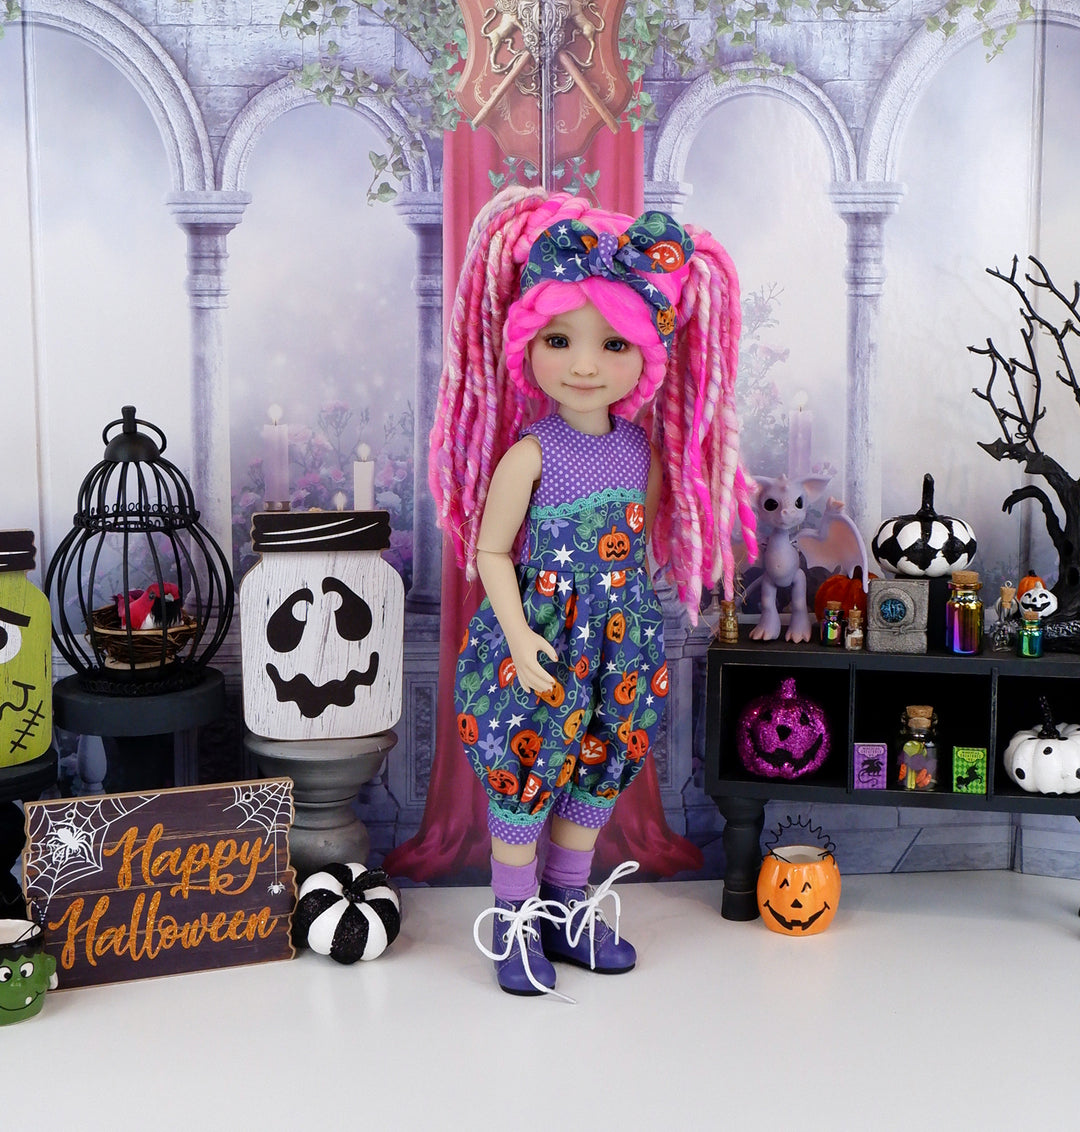 Twilight Pumpkins - romper with boots for Ruby Red Fashion Friends doll